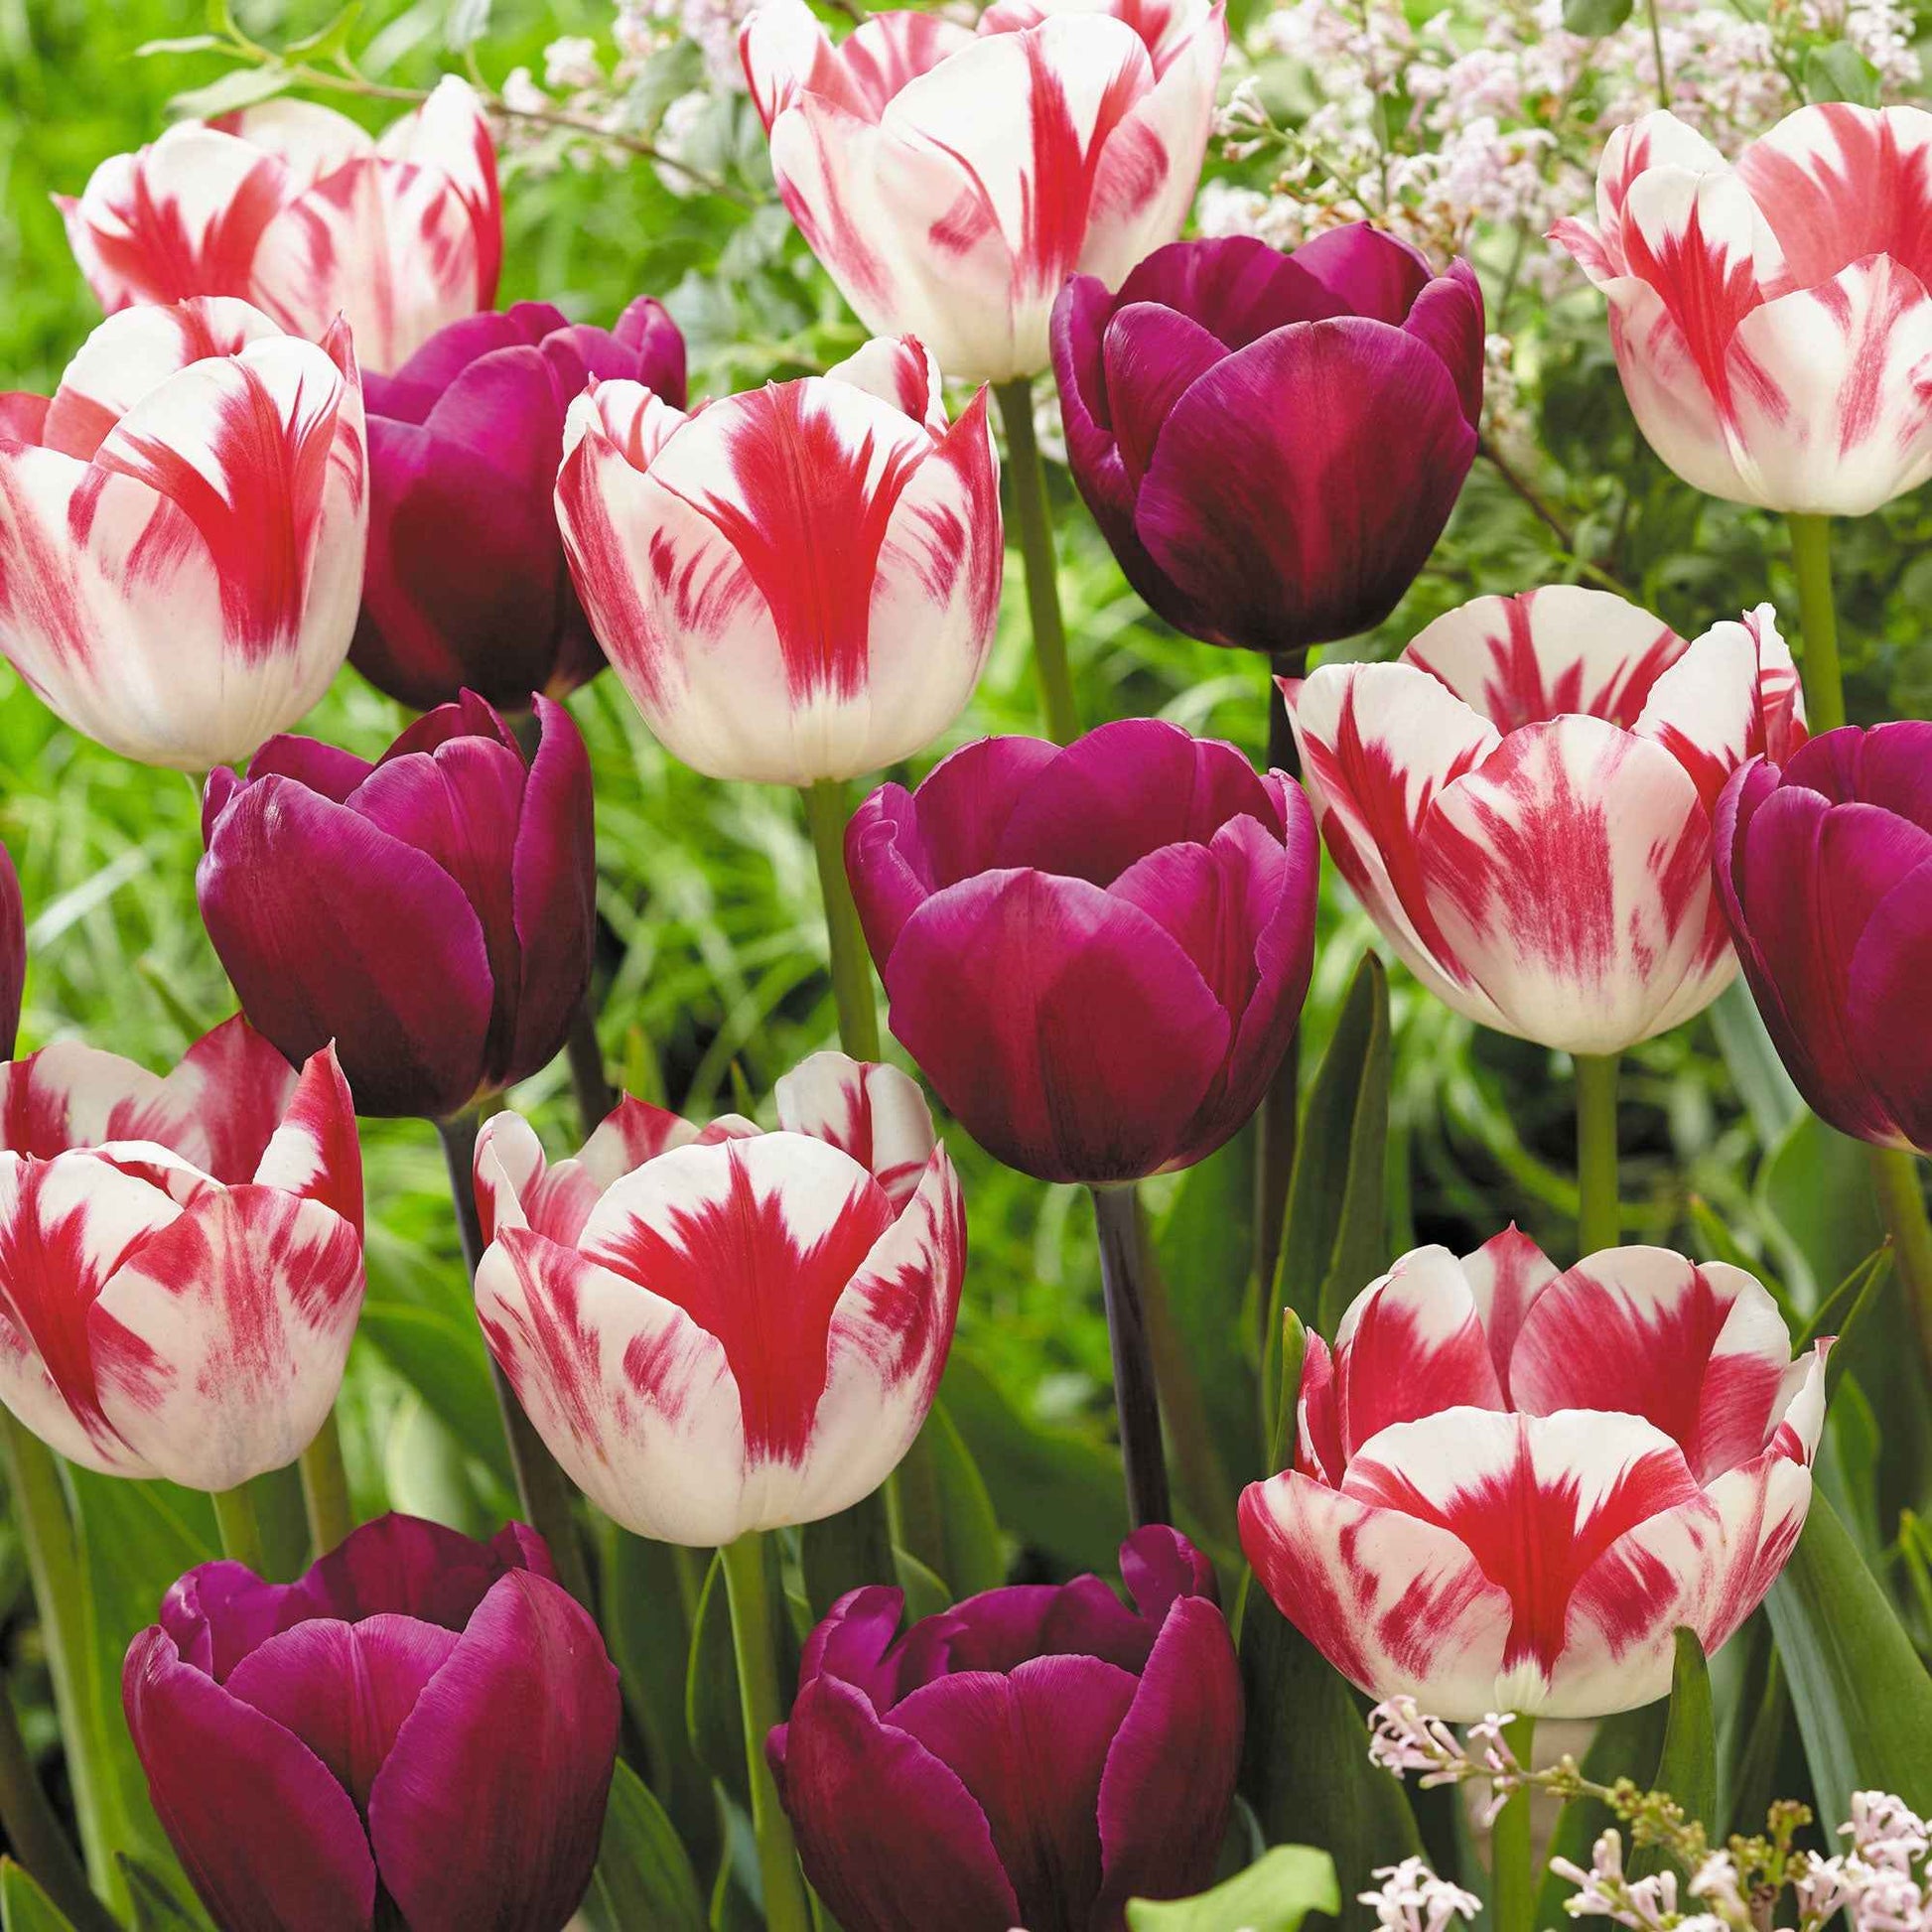 16x Tulp Tulipa - Mix 'Flames At Night' Paars-Rood-Wit - Alle populaire bloembollen